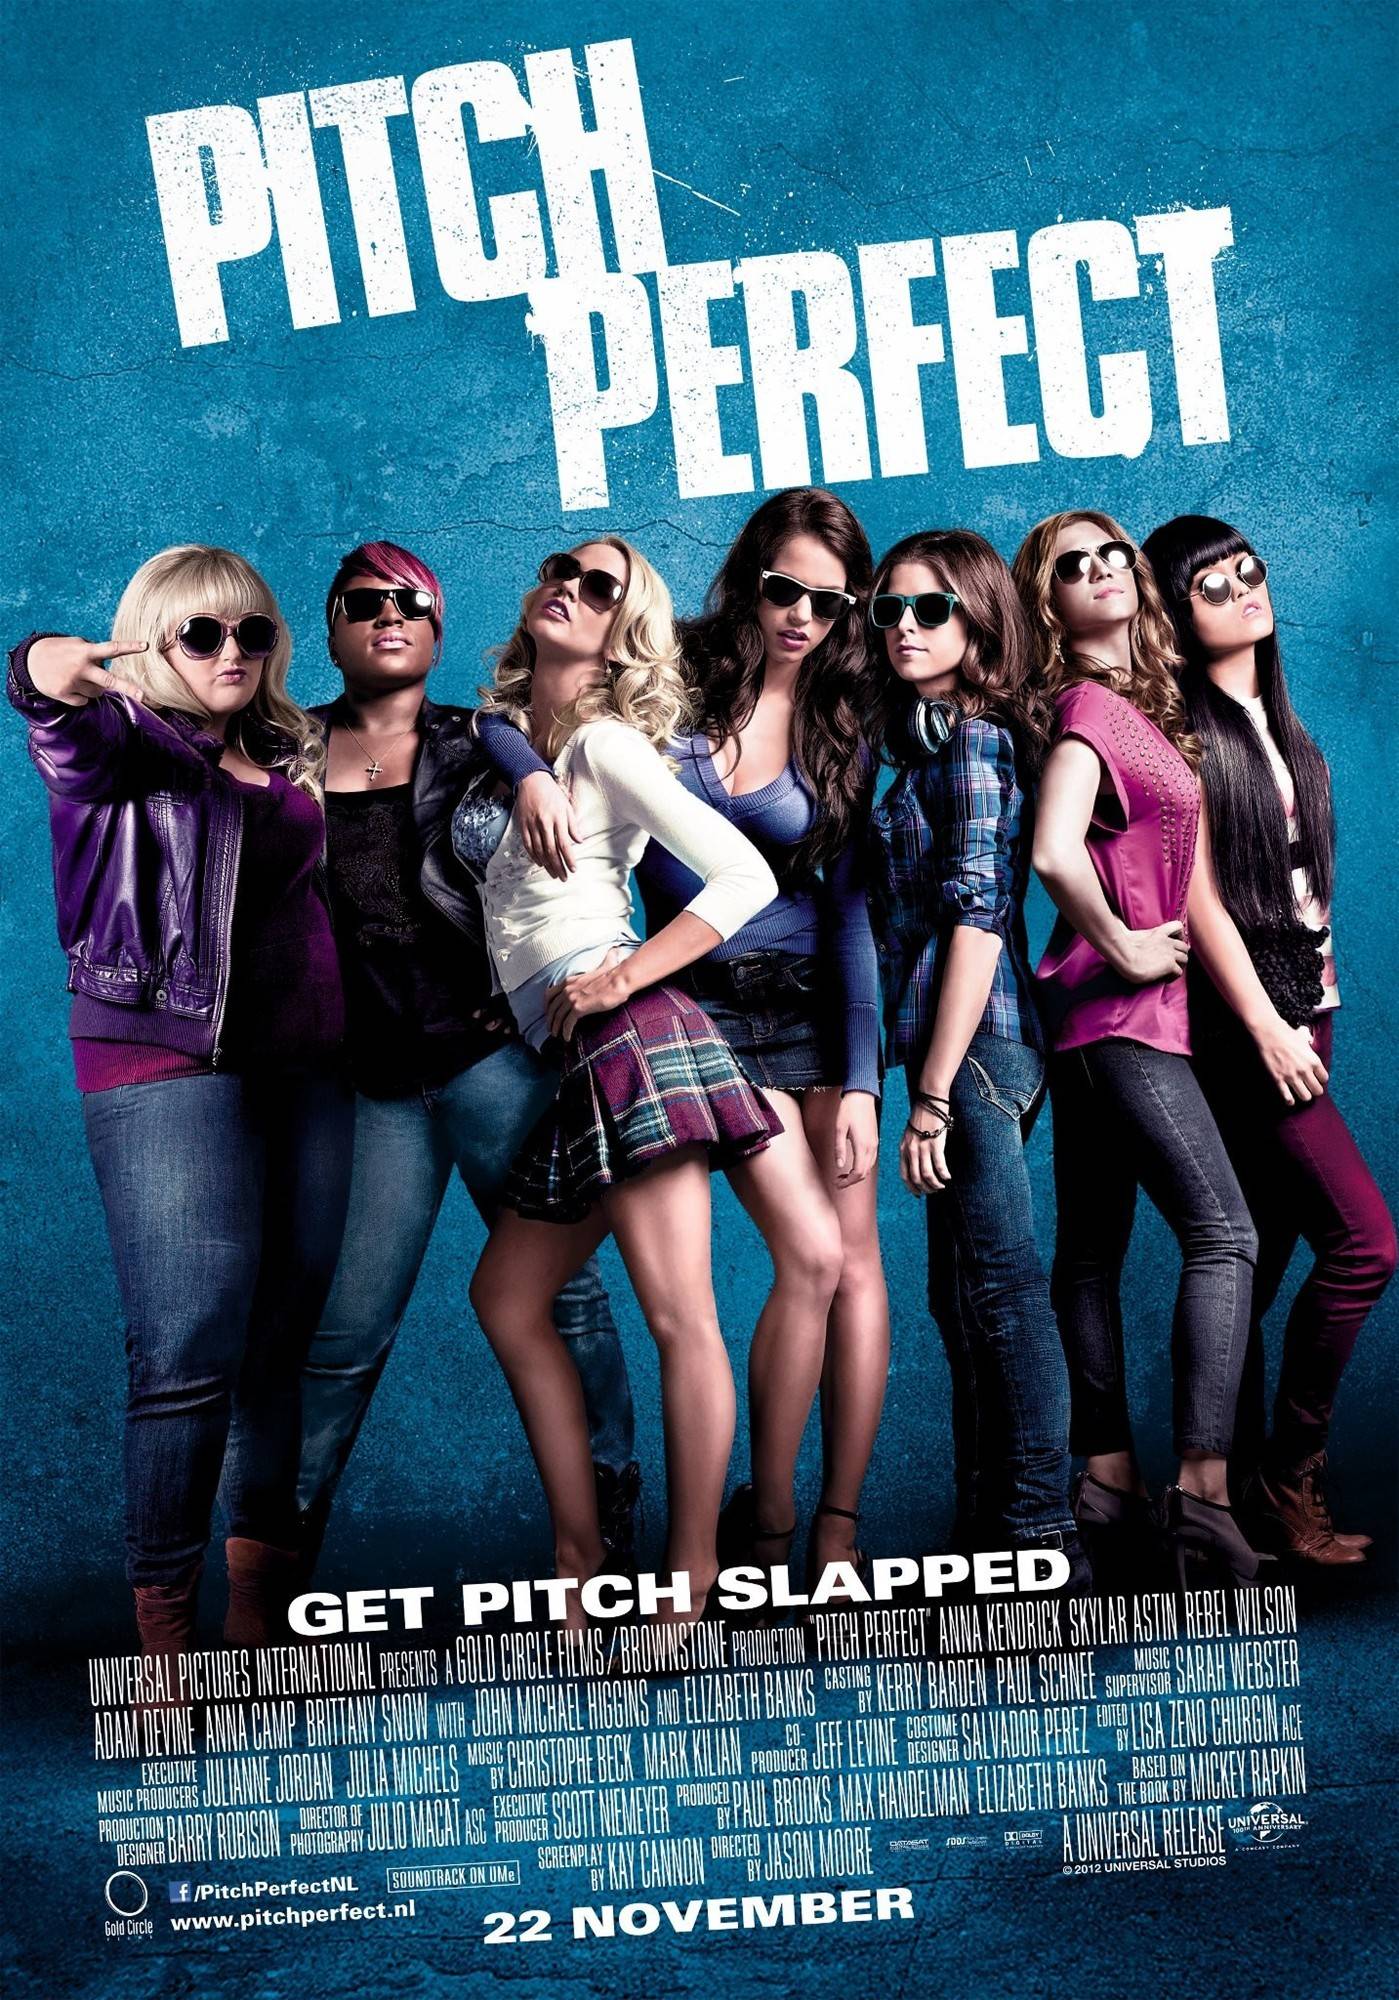 pitch-perfect-poster06.jpg